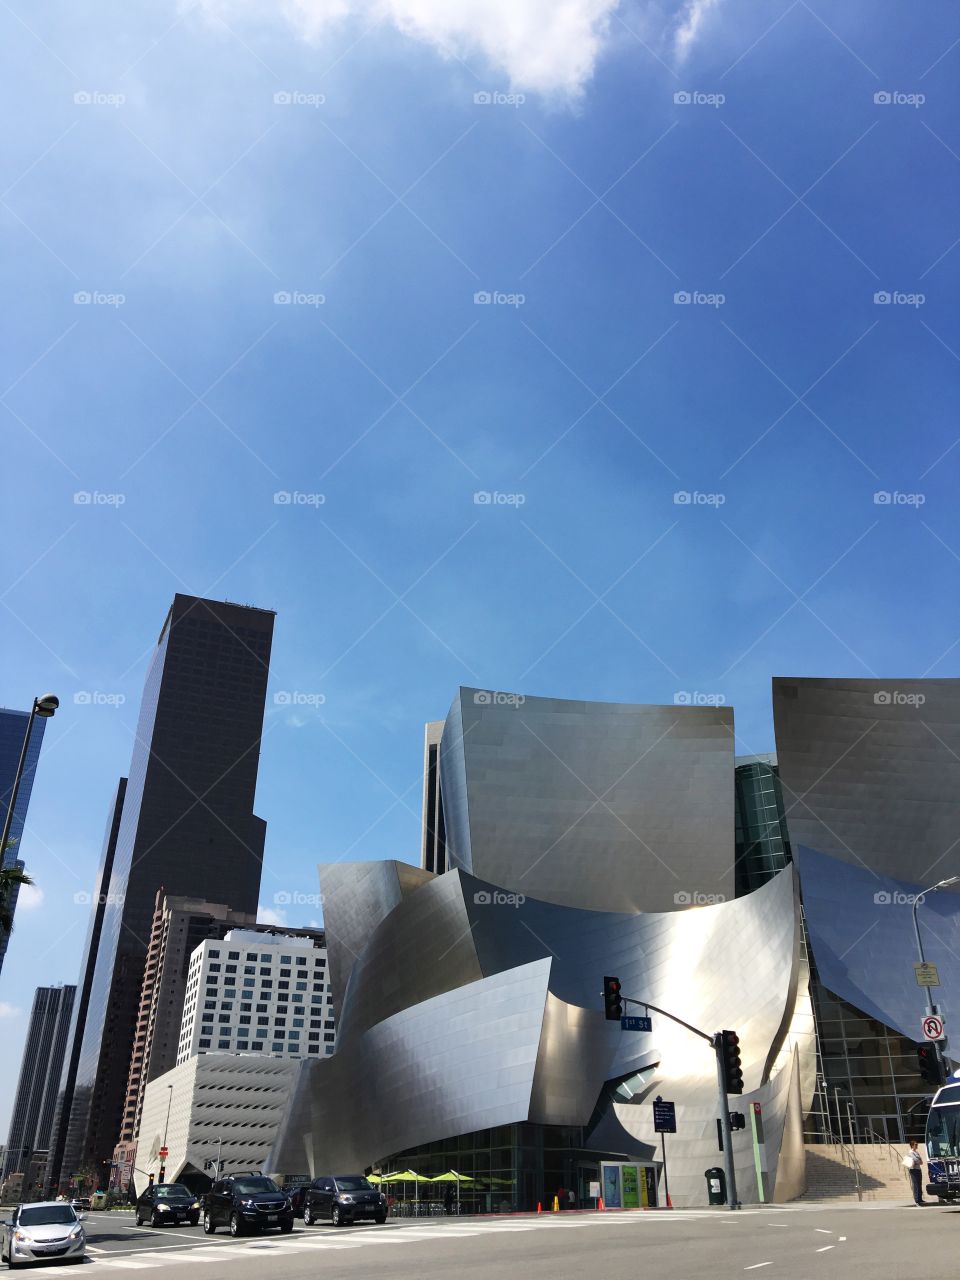 Los Angeles at 1st Street featuring Walt Disney Concert Hall and the Broad Museum